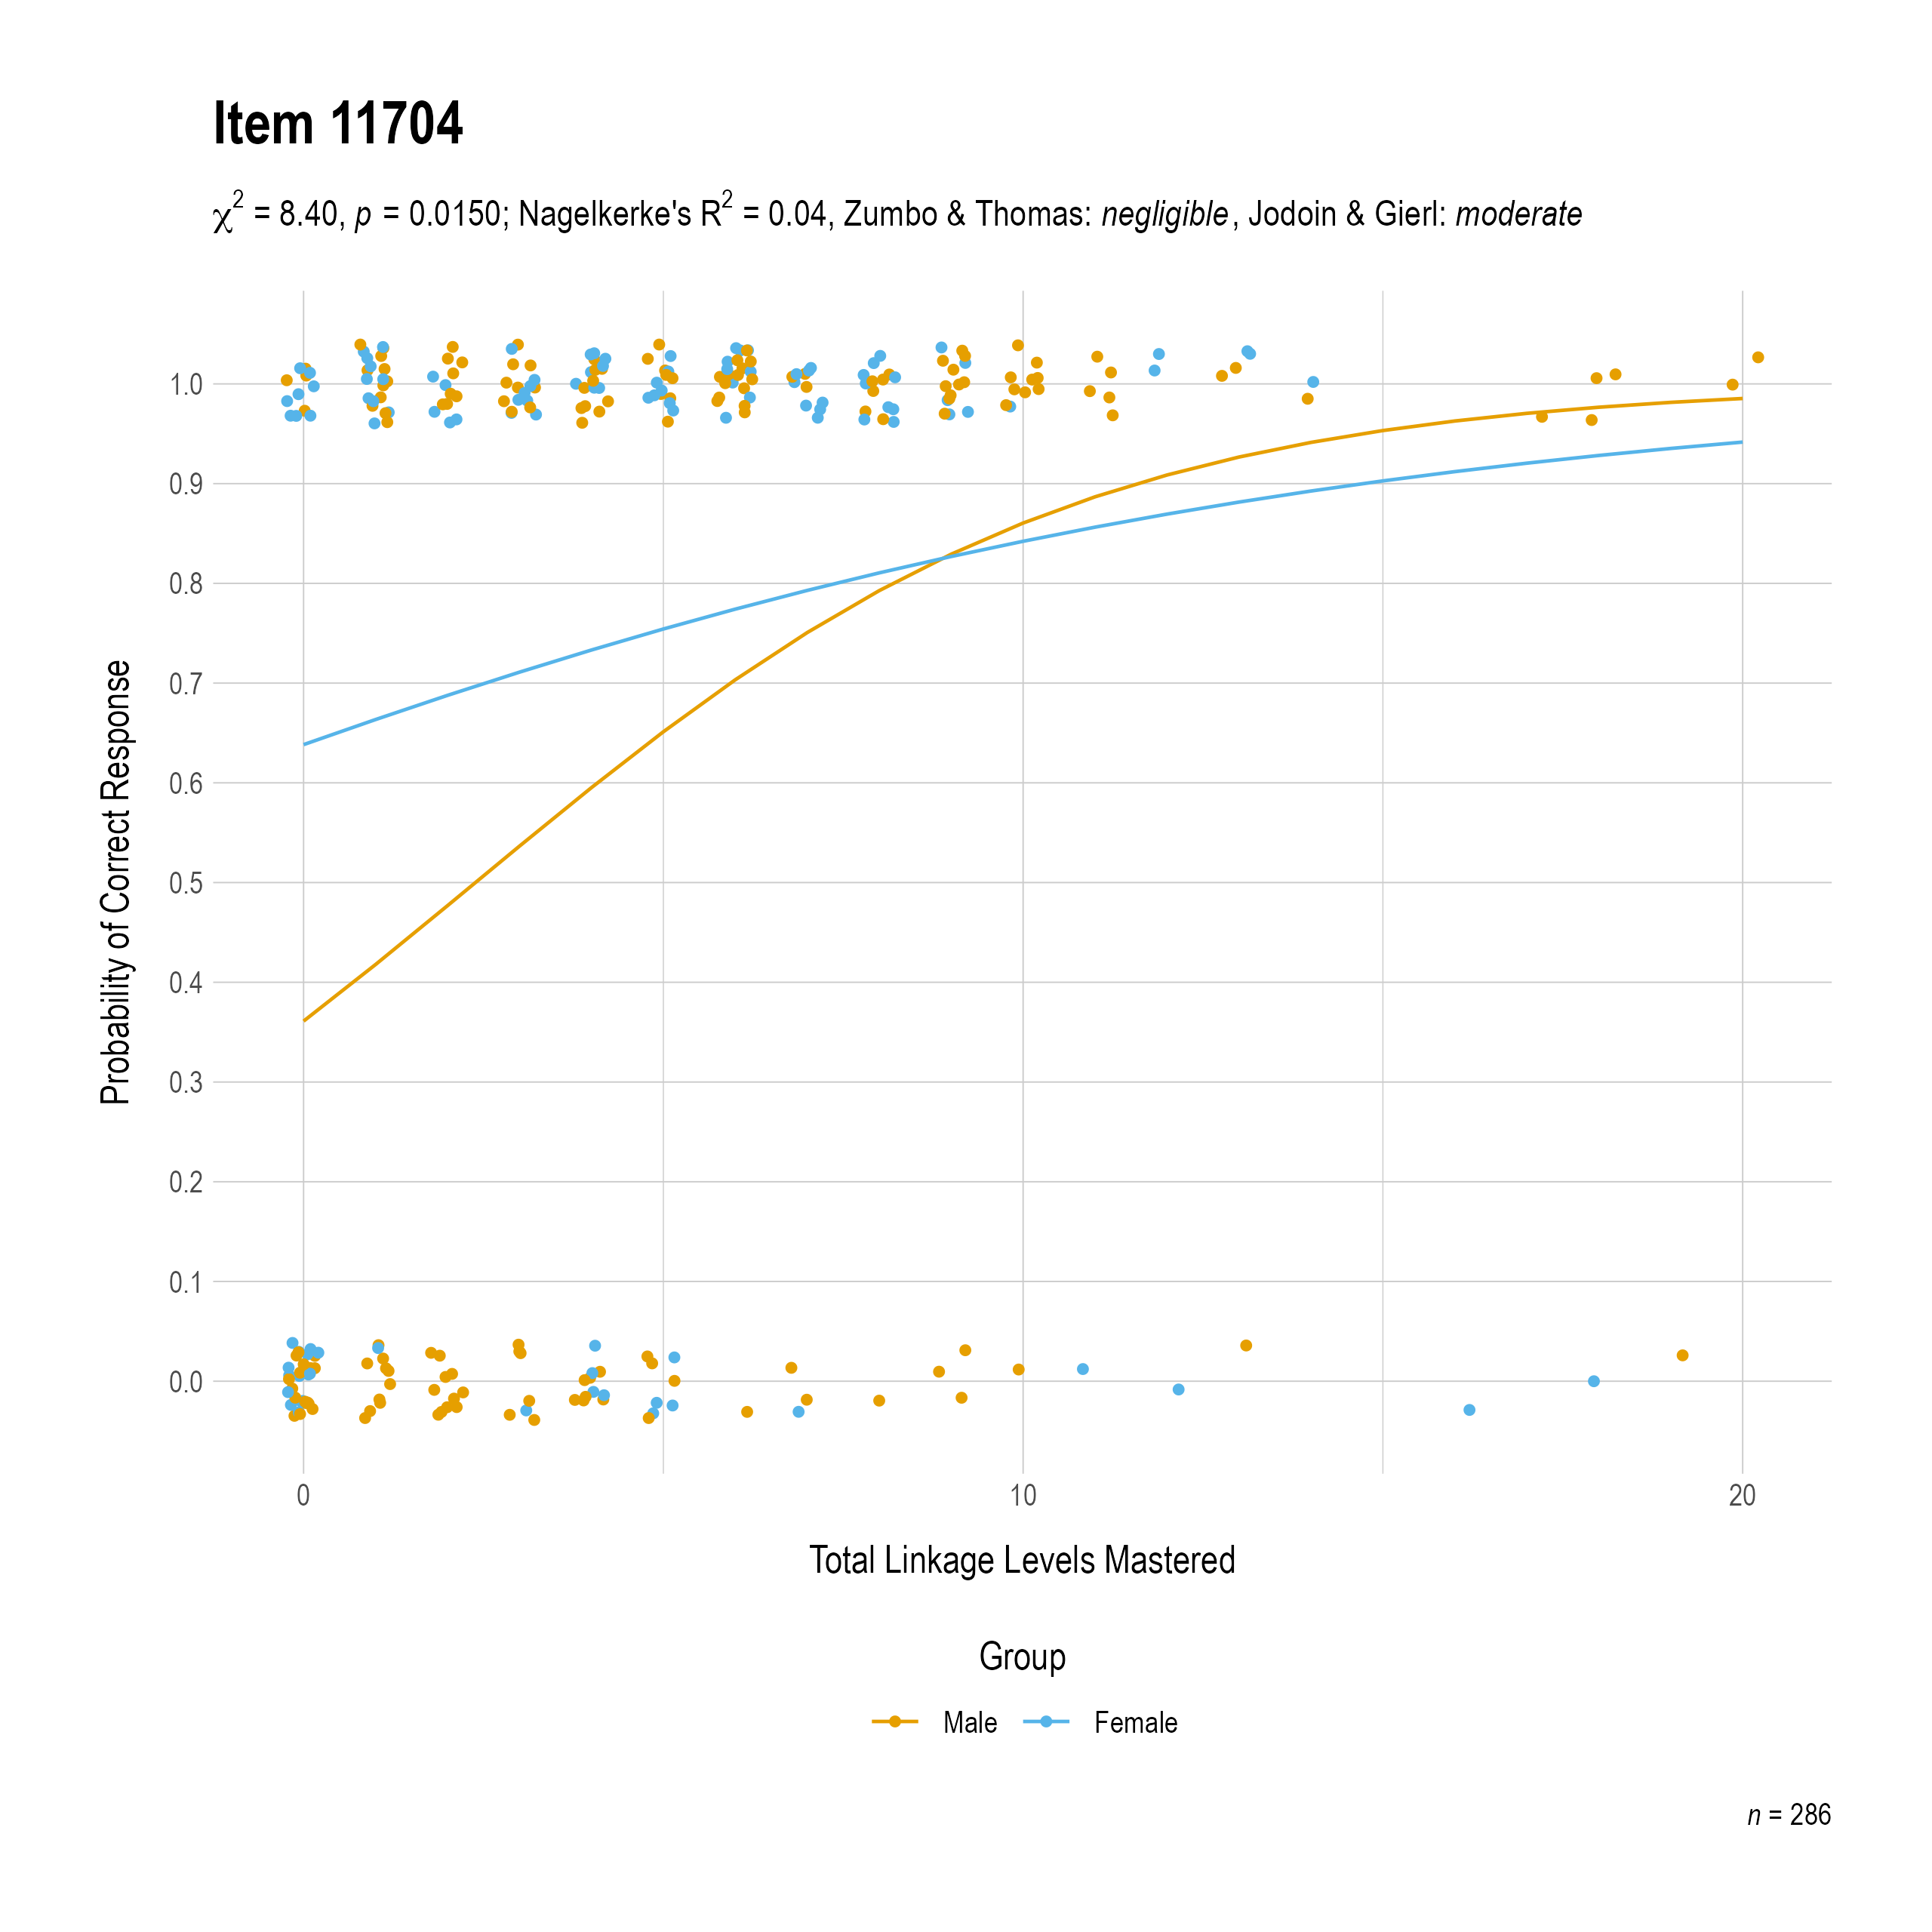 The plot of the combined gender differential item function evidence for Mathematics item 11704. The figure contains points shaded by group. The figure also contains a logistic regression curve for each group. The total linkage levels mastered in is on the x-axis, and the probability of a correct response is on the y-axis.